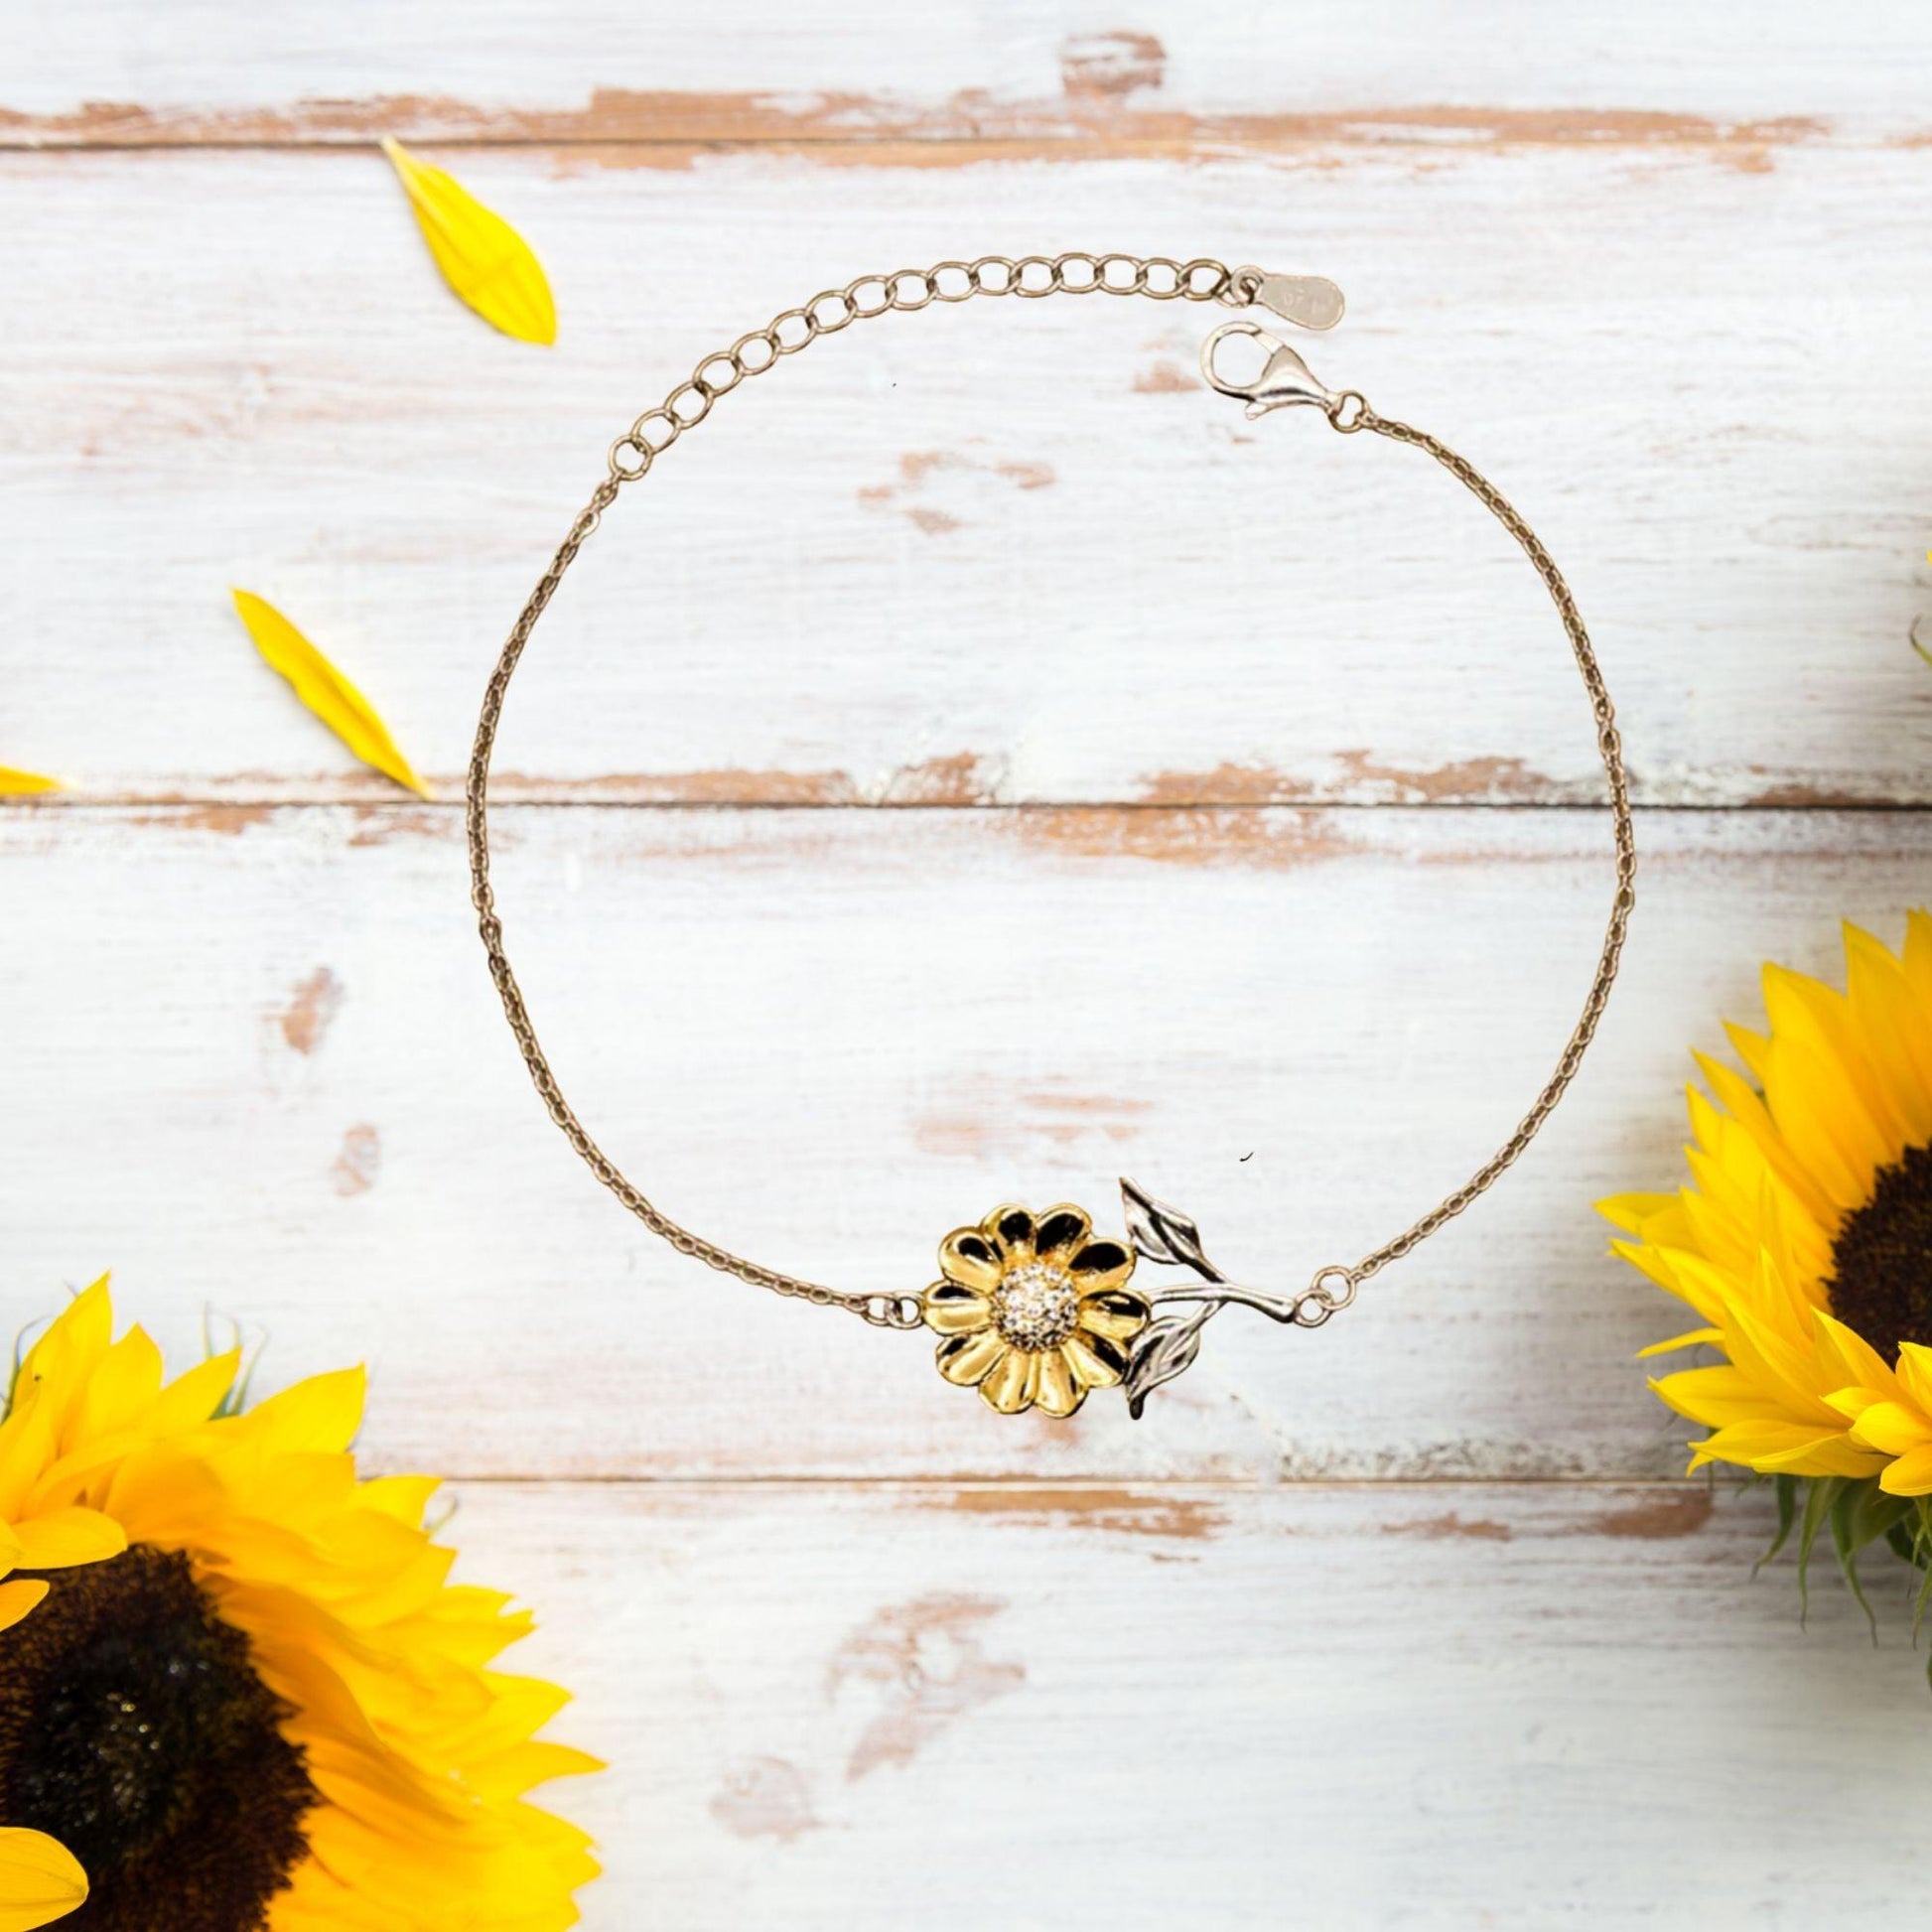 Motivational Boyfriend Sunflower Bracelet - I can promise to love you for the rest of my life, Birthday, Christmas Holiday Jewelry Gift - Mallard Moon Gift Shop